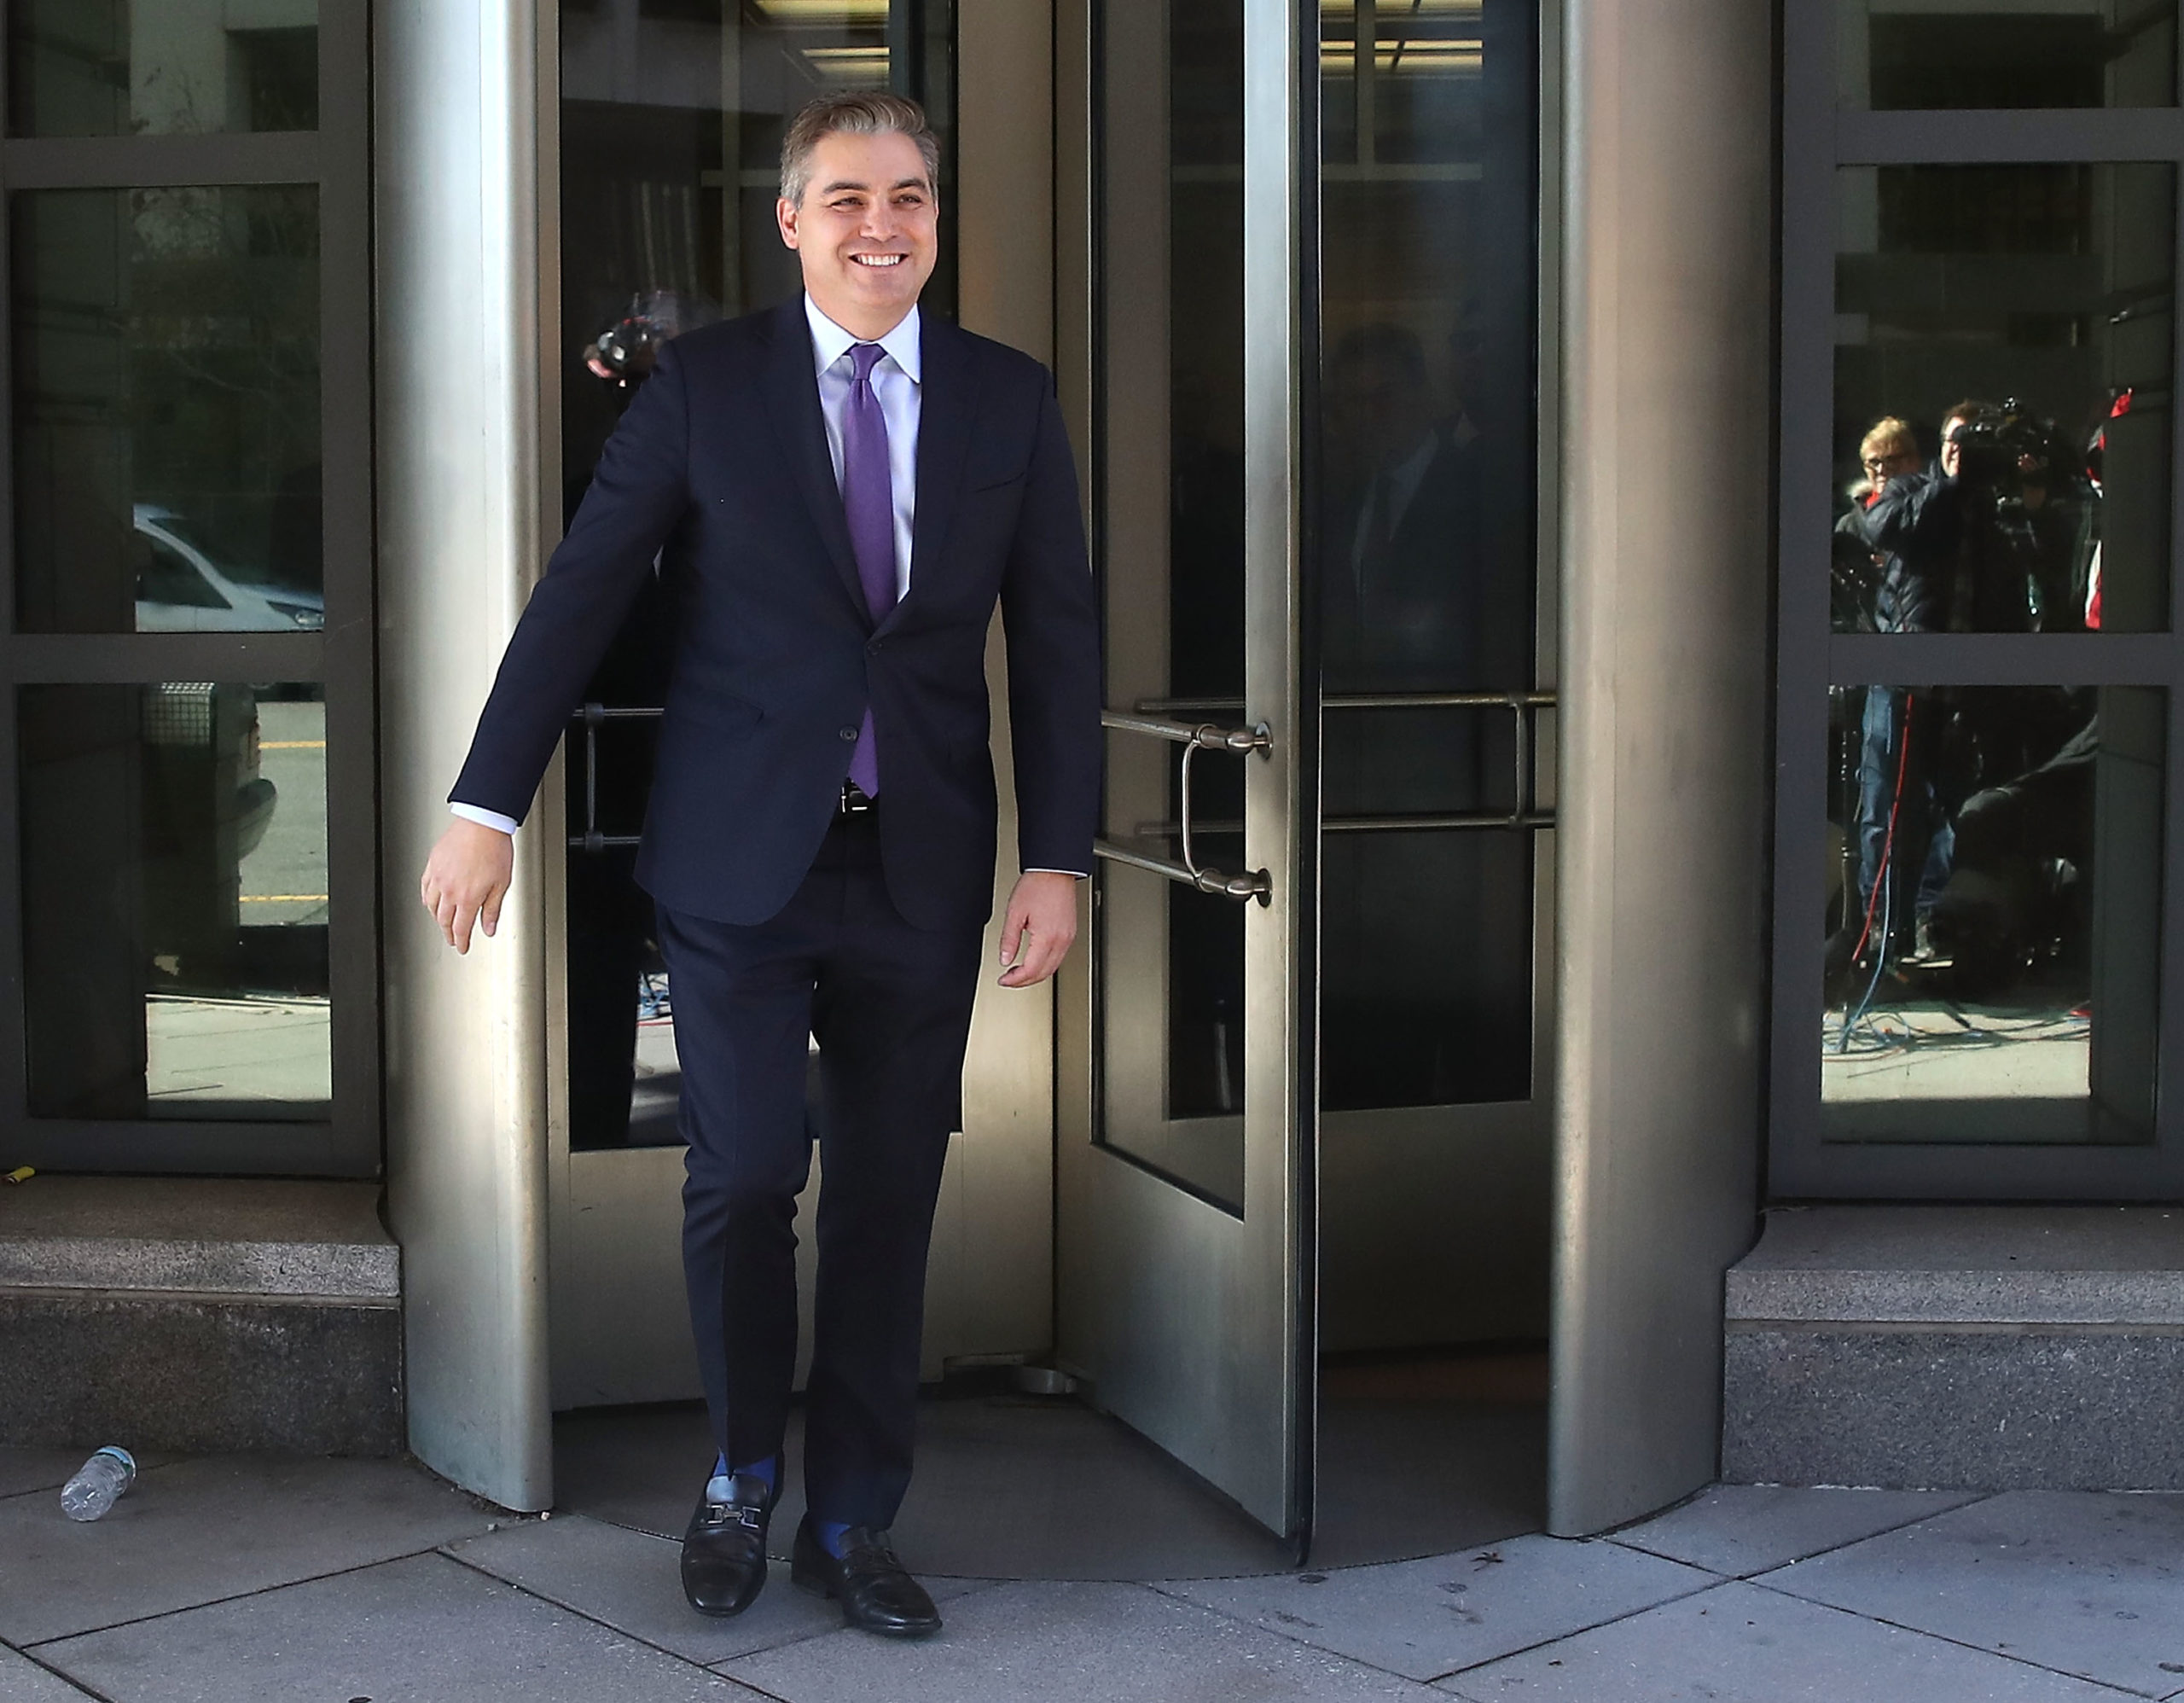 CNN White House correspondent Jim Acosta walks out of the U.S. District Court House after a judge ruled that he should have his White House press pass returned immediately, on November 16, 2018 in Washington, DC. (Mark Wilson/Getty Images)